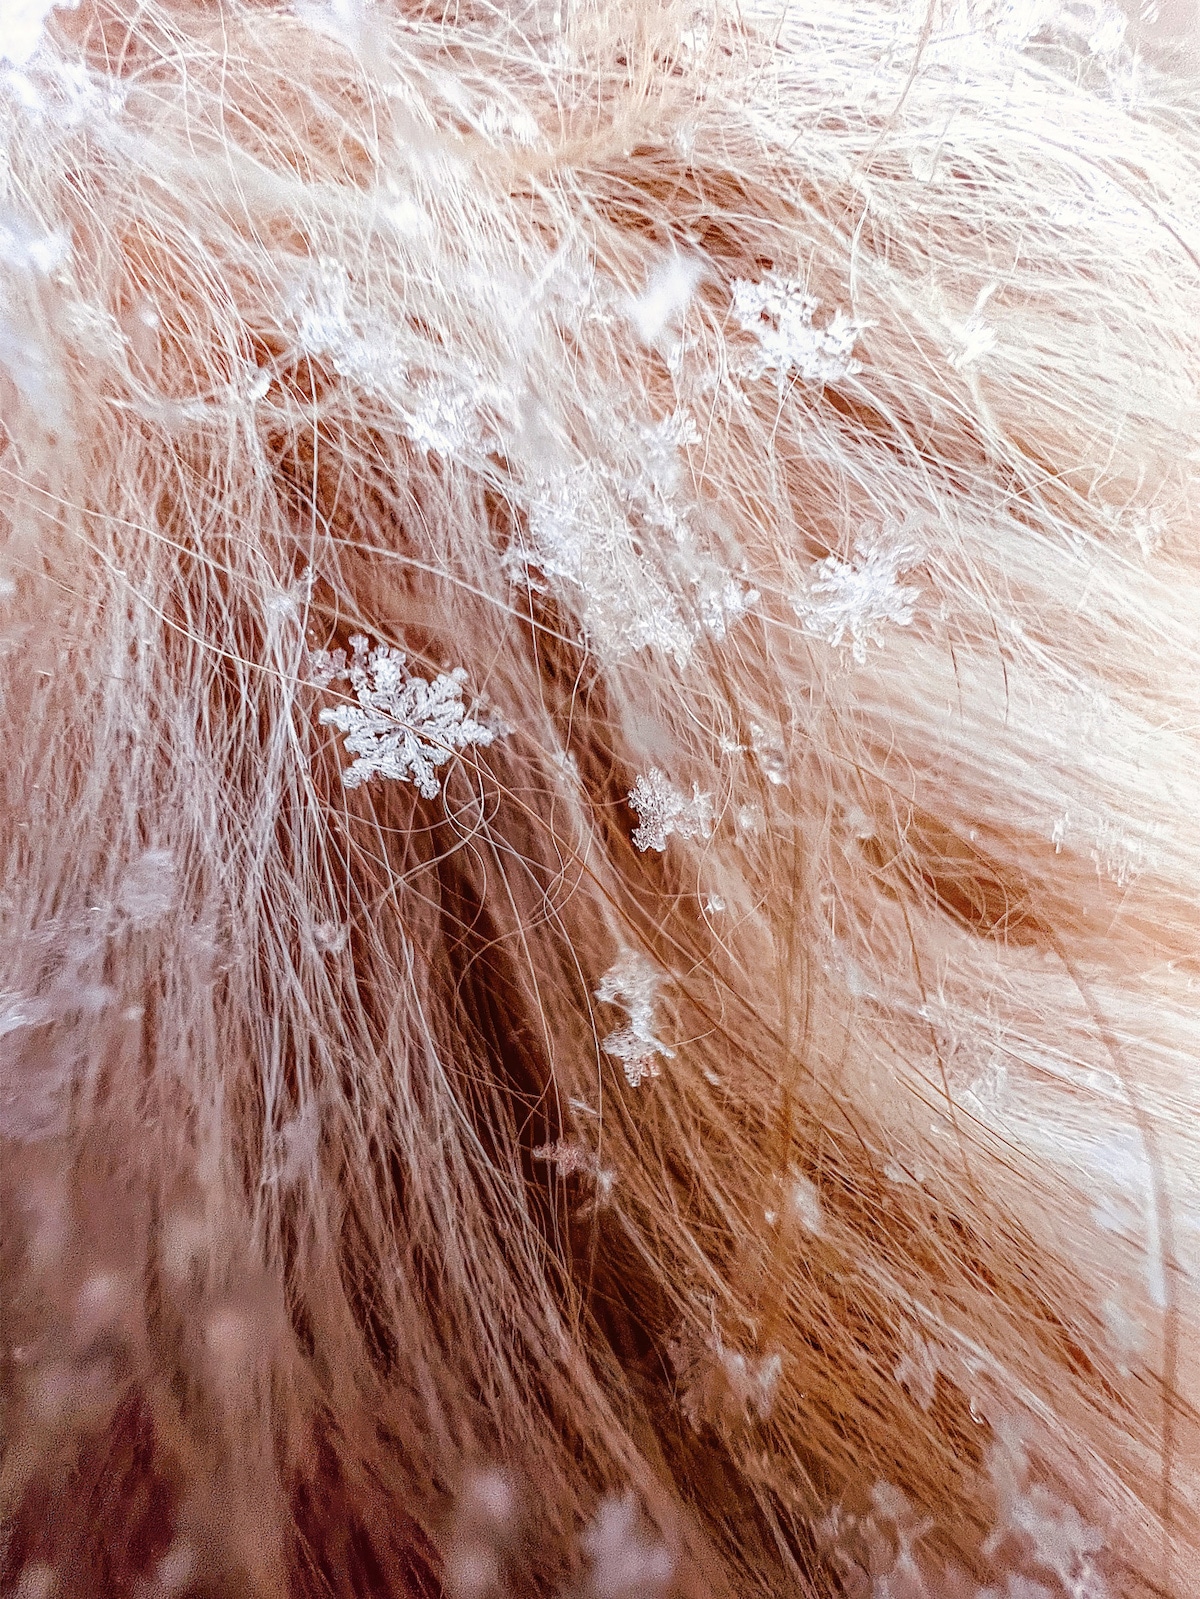 Macro Photo of Snowflakes Settled on a Dog's Fur